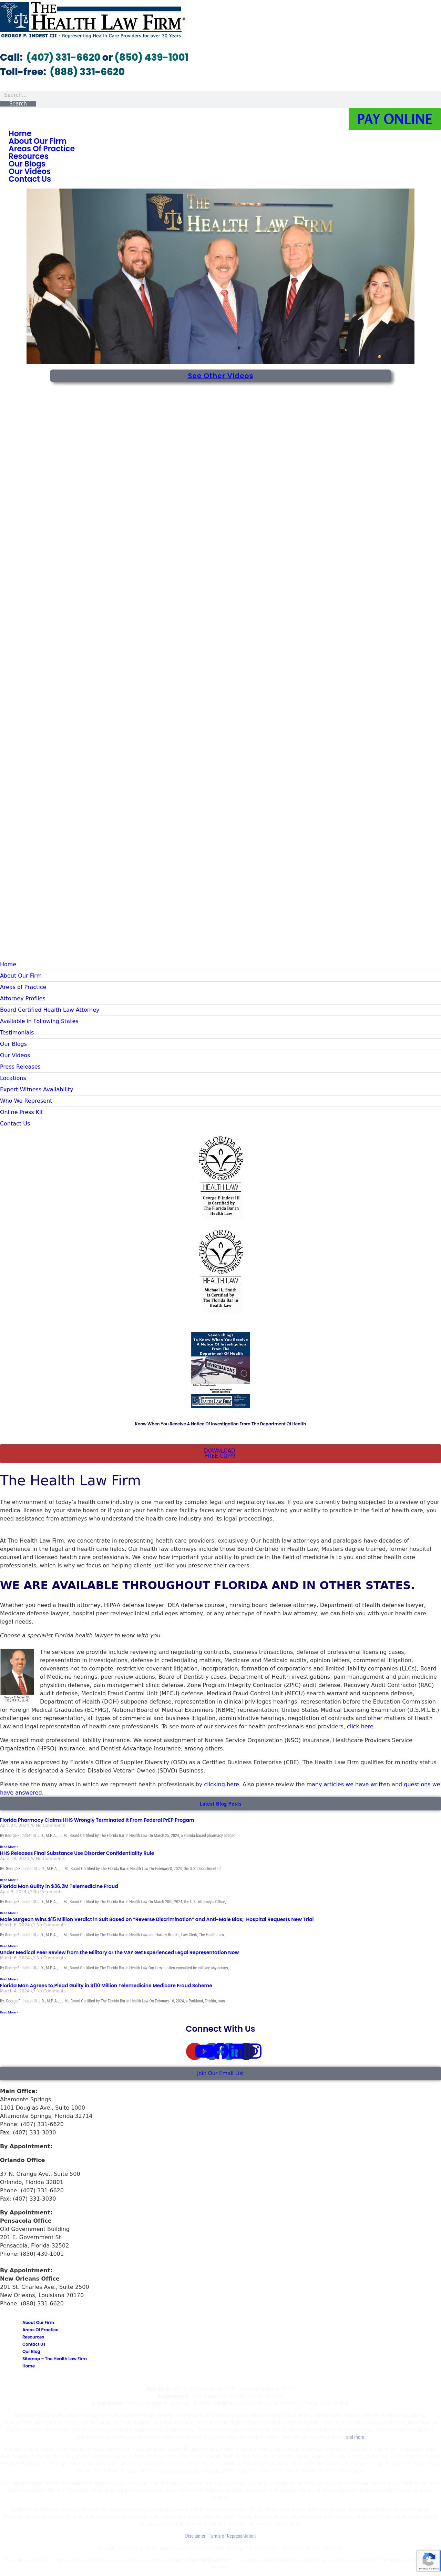 The Health Law Firm - Pensacola FL Lawyers